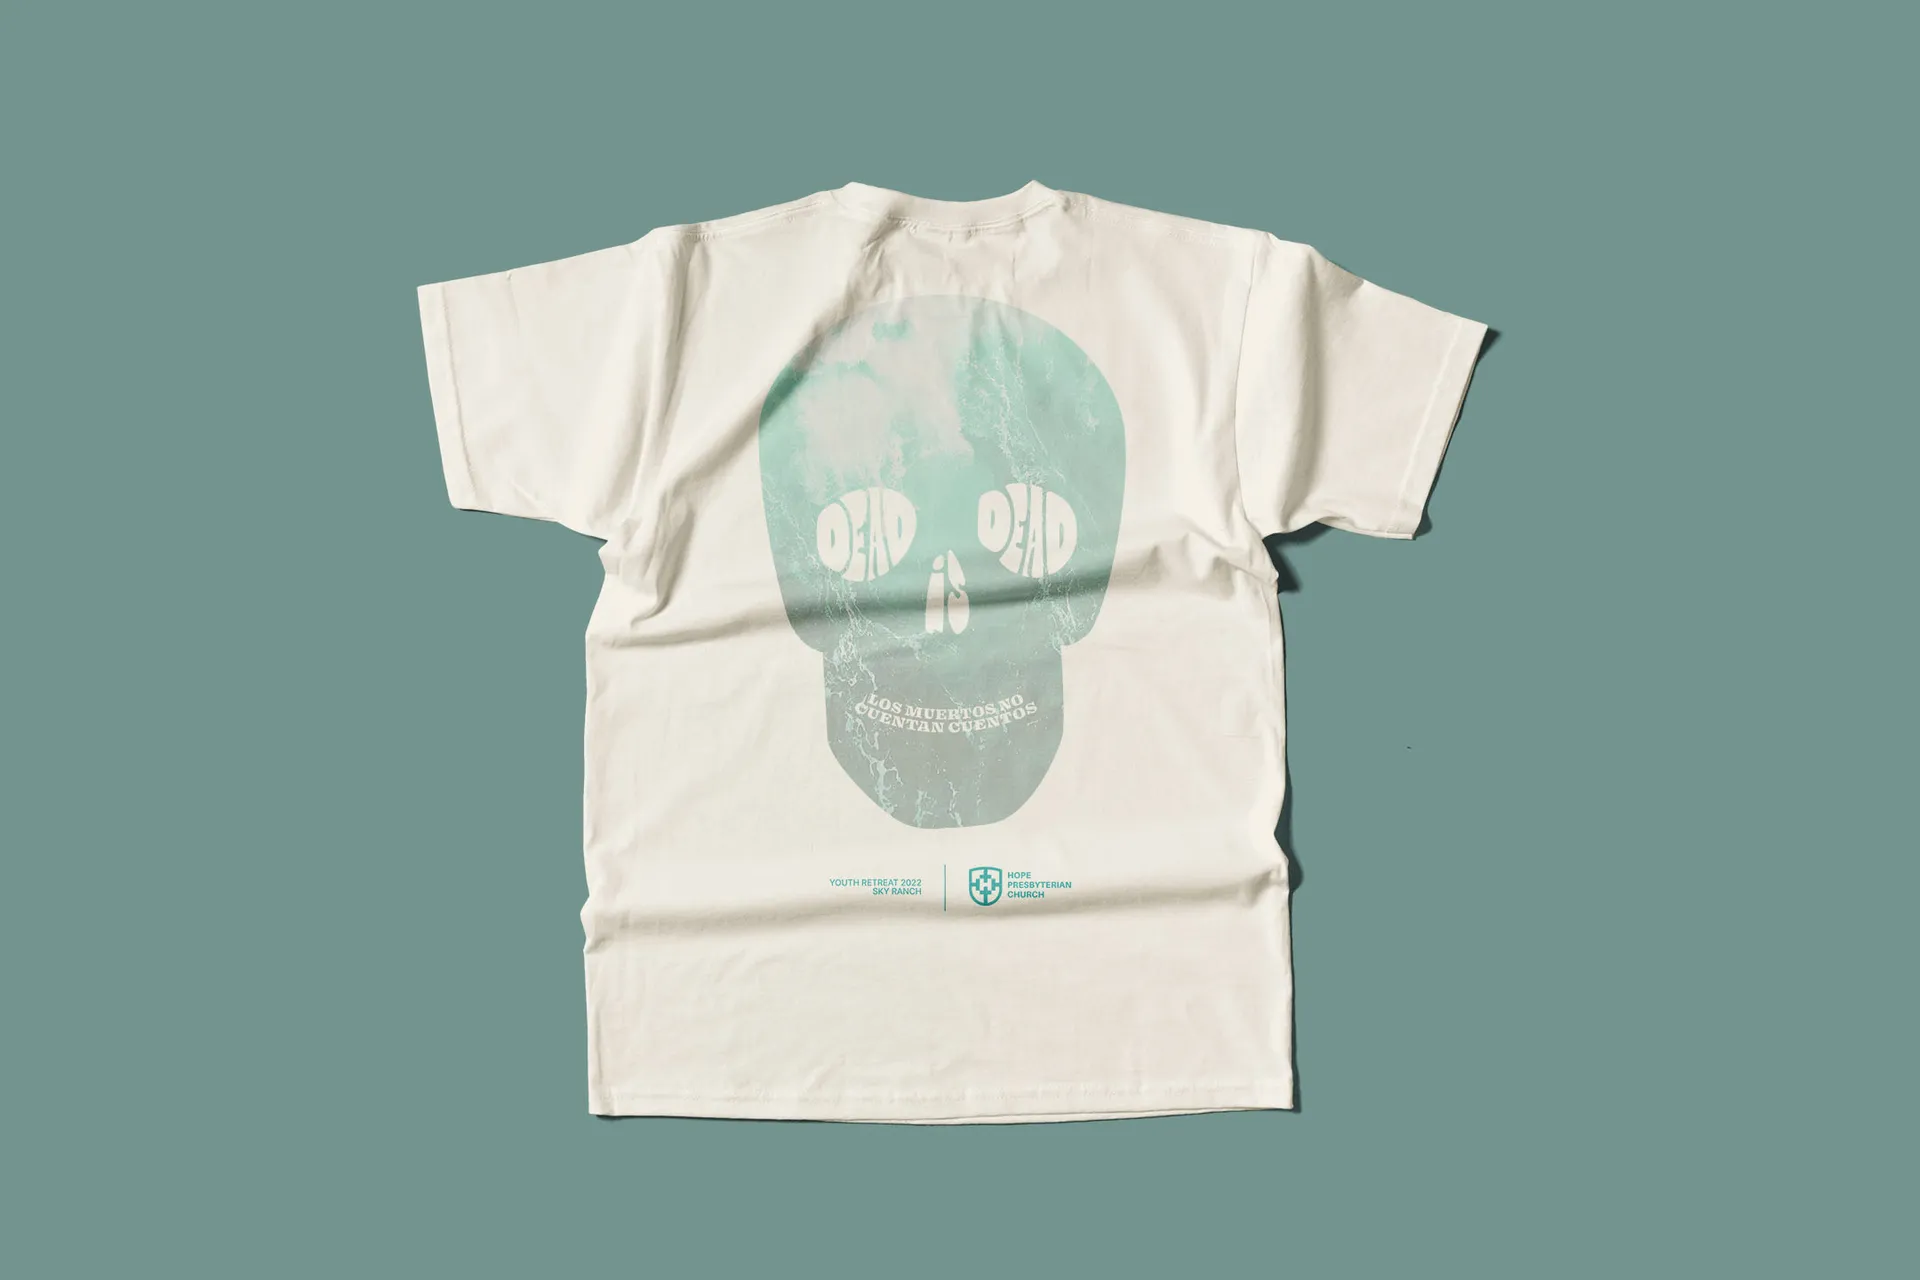 A flat view of the t-shirt, showing the back of the design